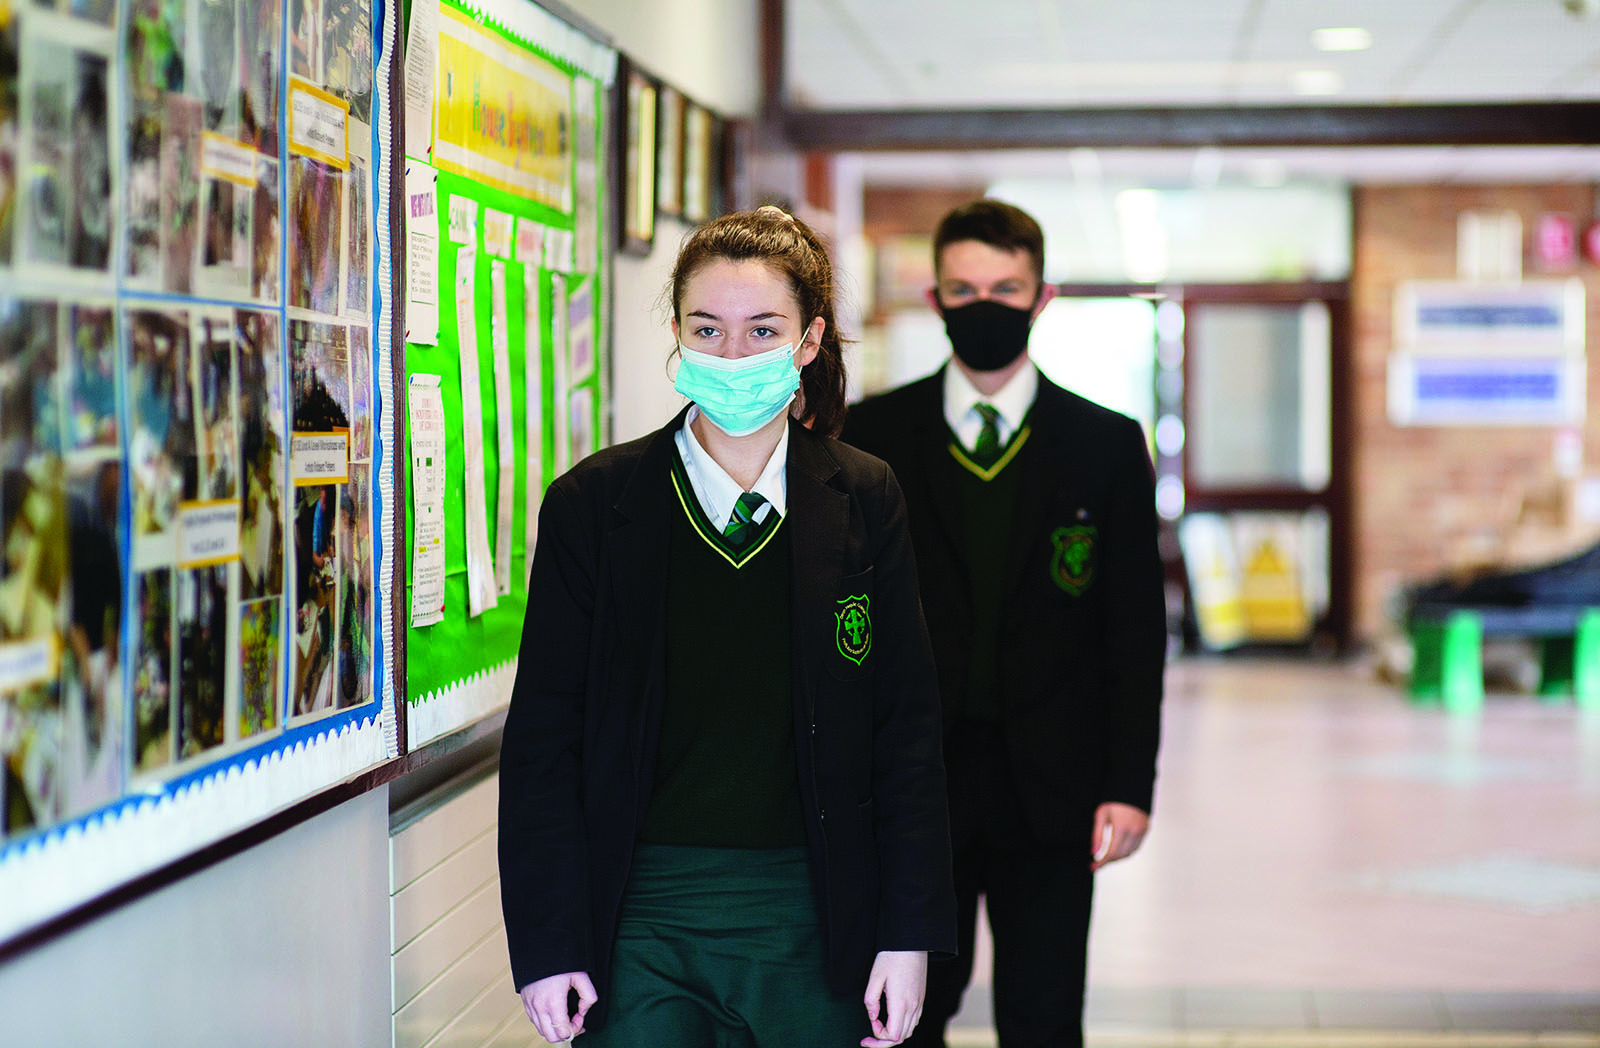 Face coverings recommended for secondary schools